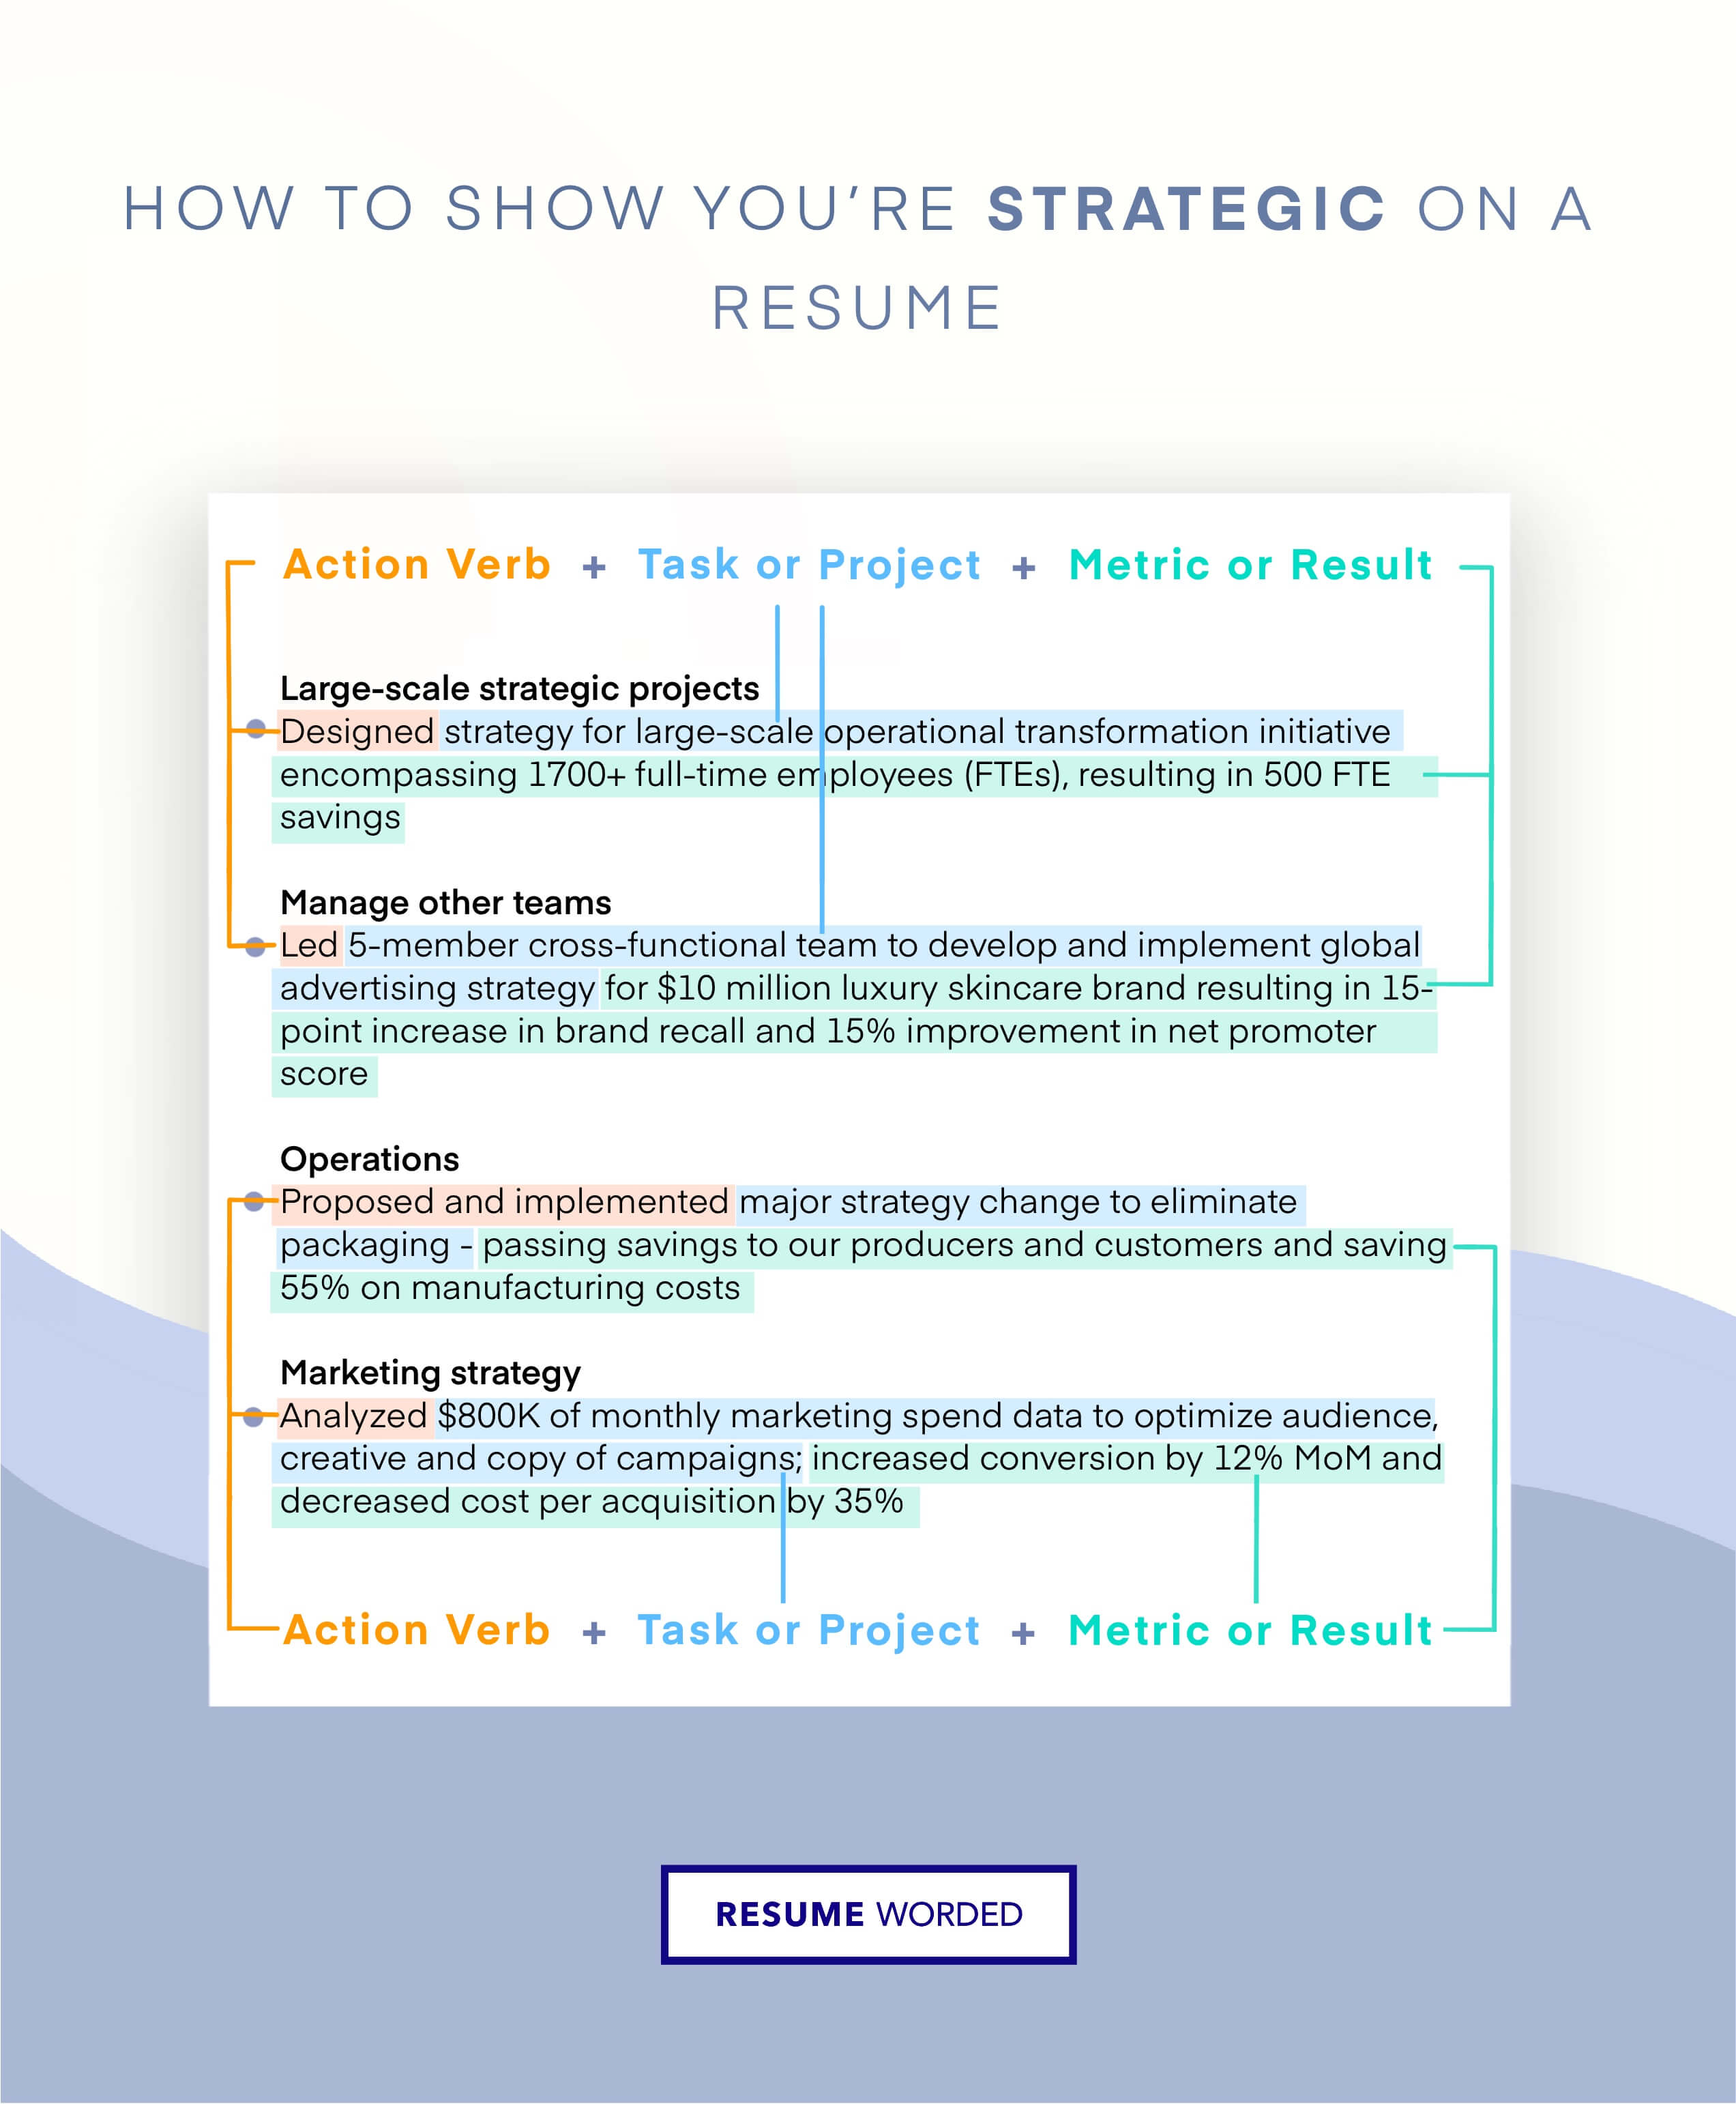 Show your creative and strategic thinking skills - Advertising Manager CV